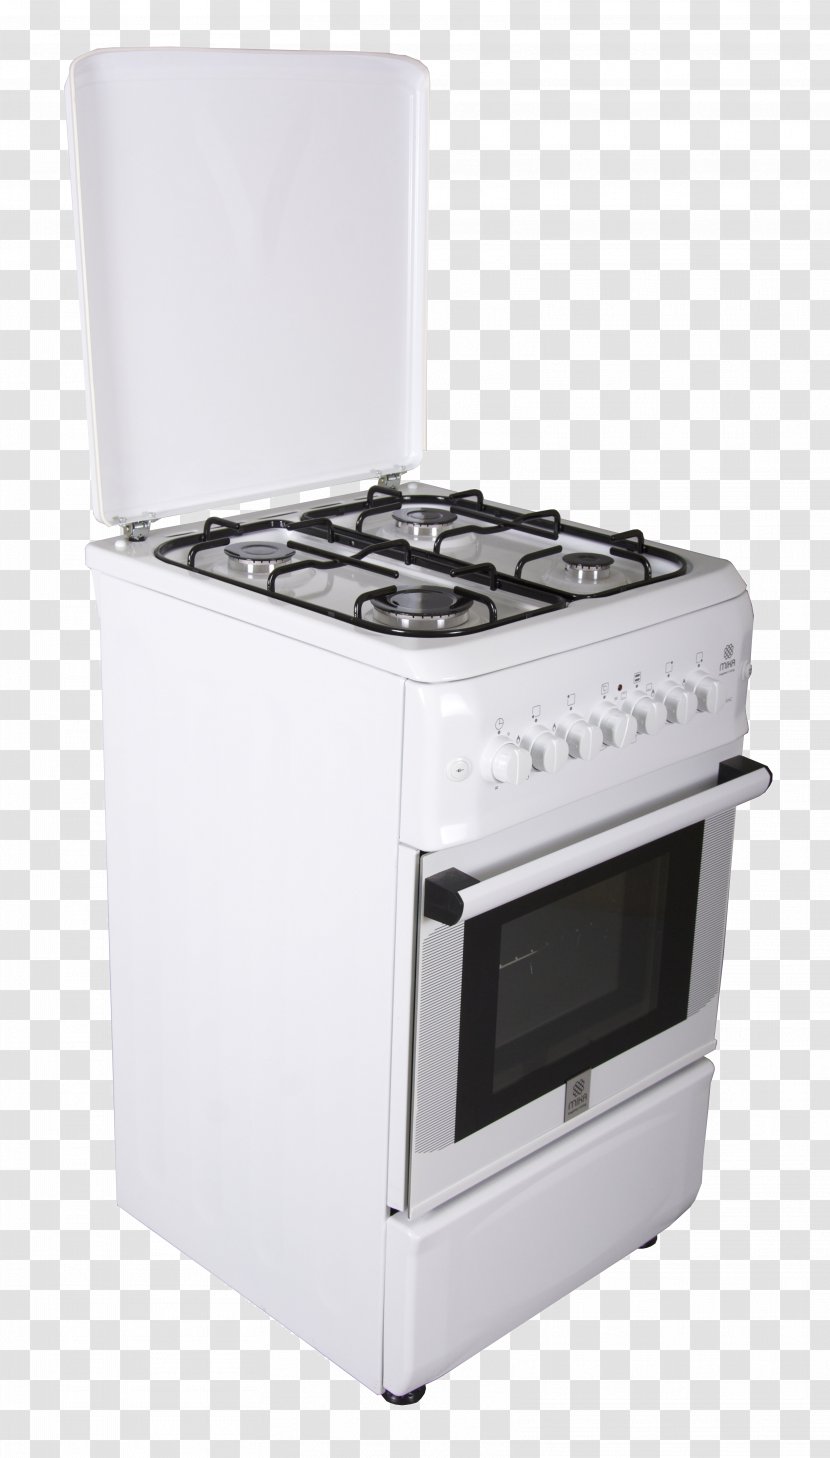 Gas Stove Cooking Ranges Table BRUHM Appliances Kenya Small Appliance - Oven - Electrical Transparent PNG